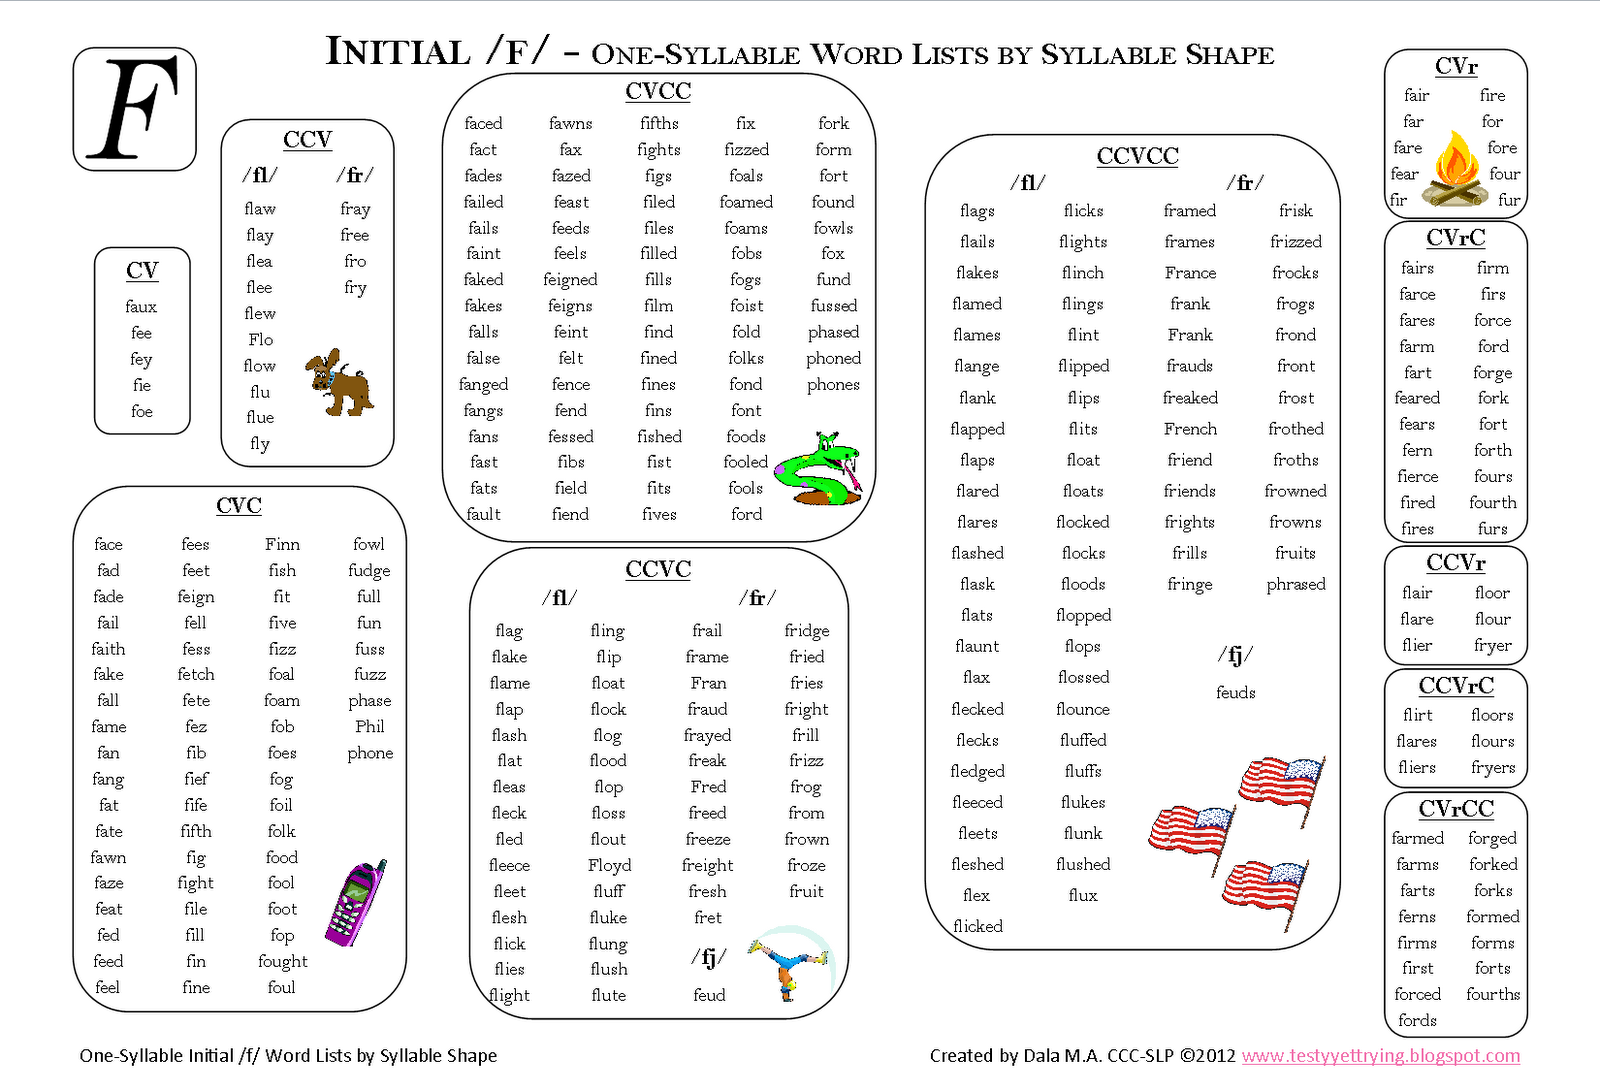 Testy yet trying: Initial F: One-Syllable Word List by Syllable Shape